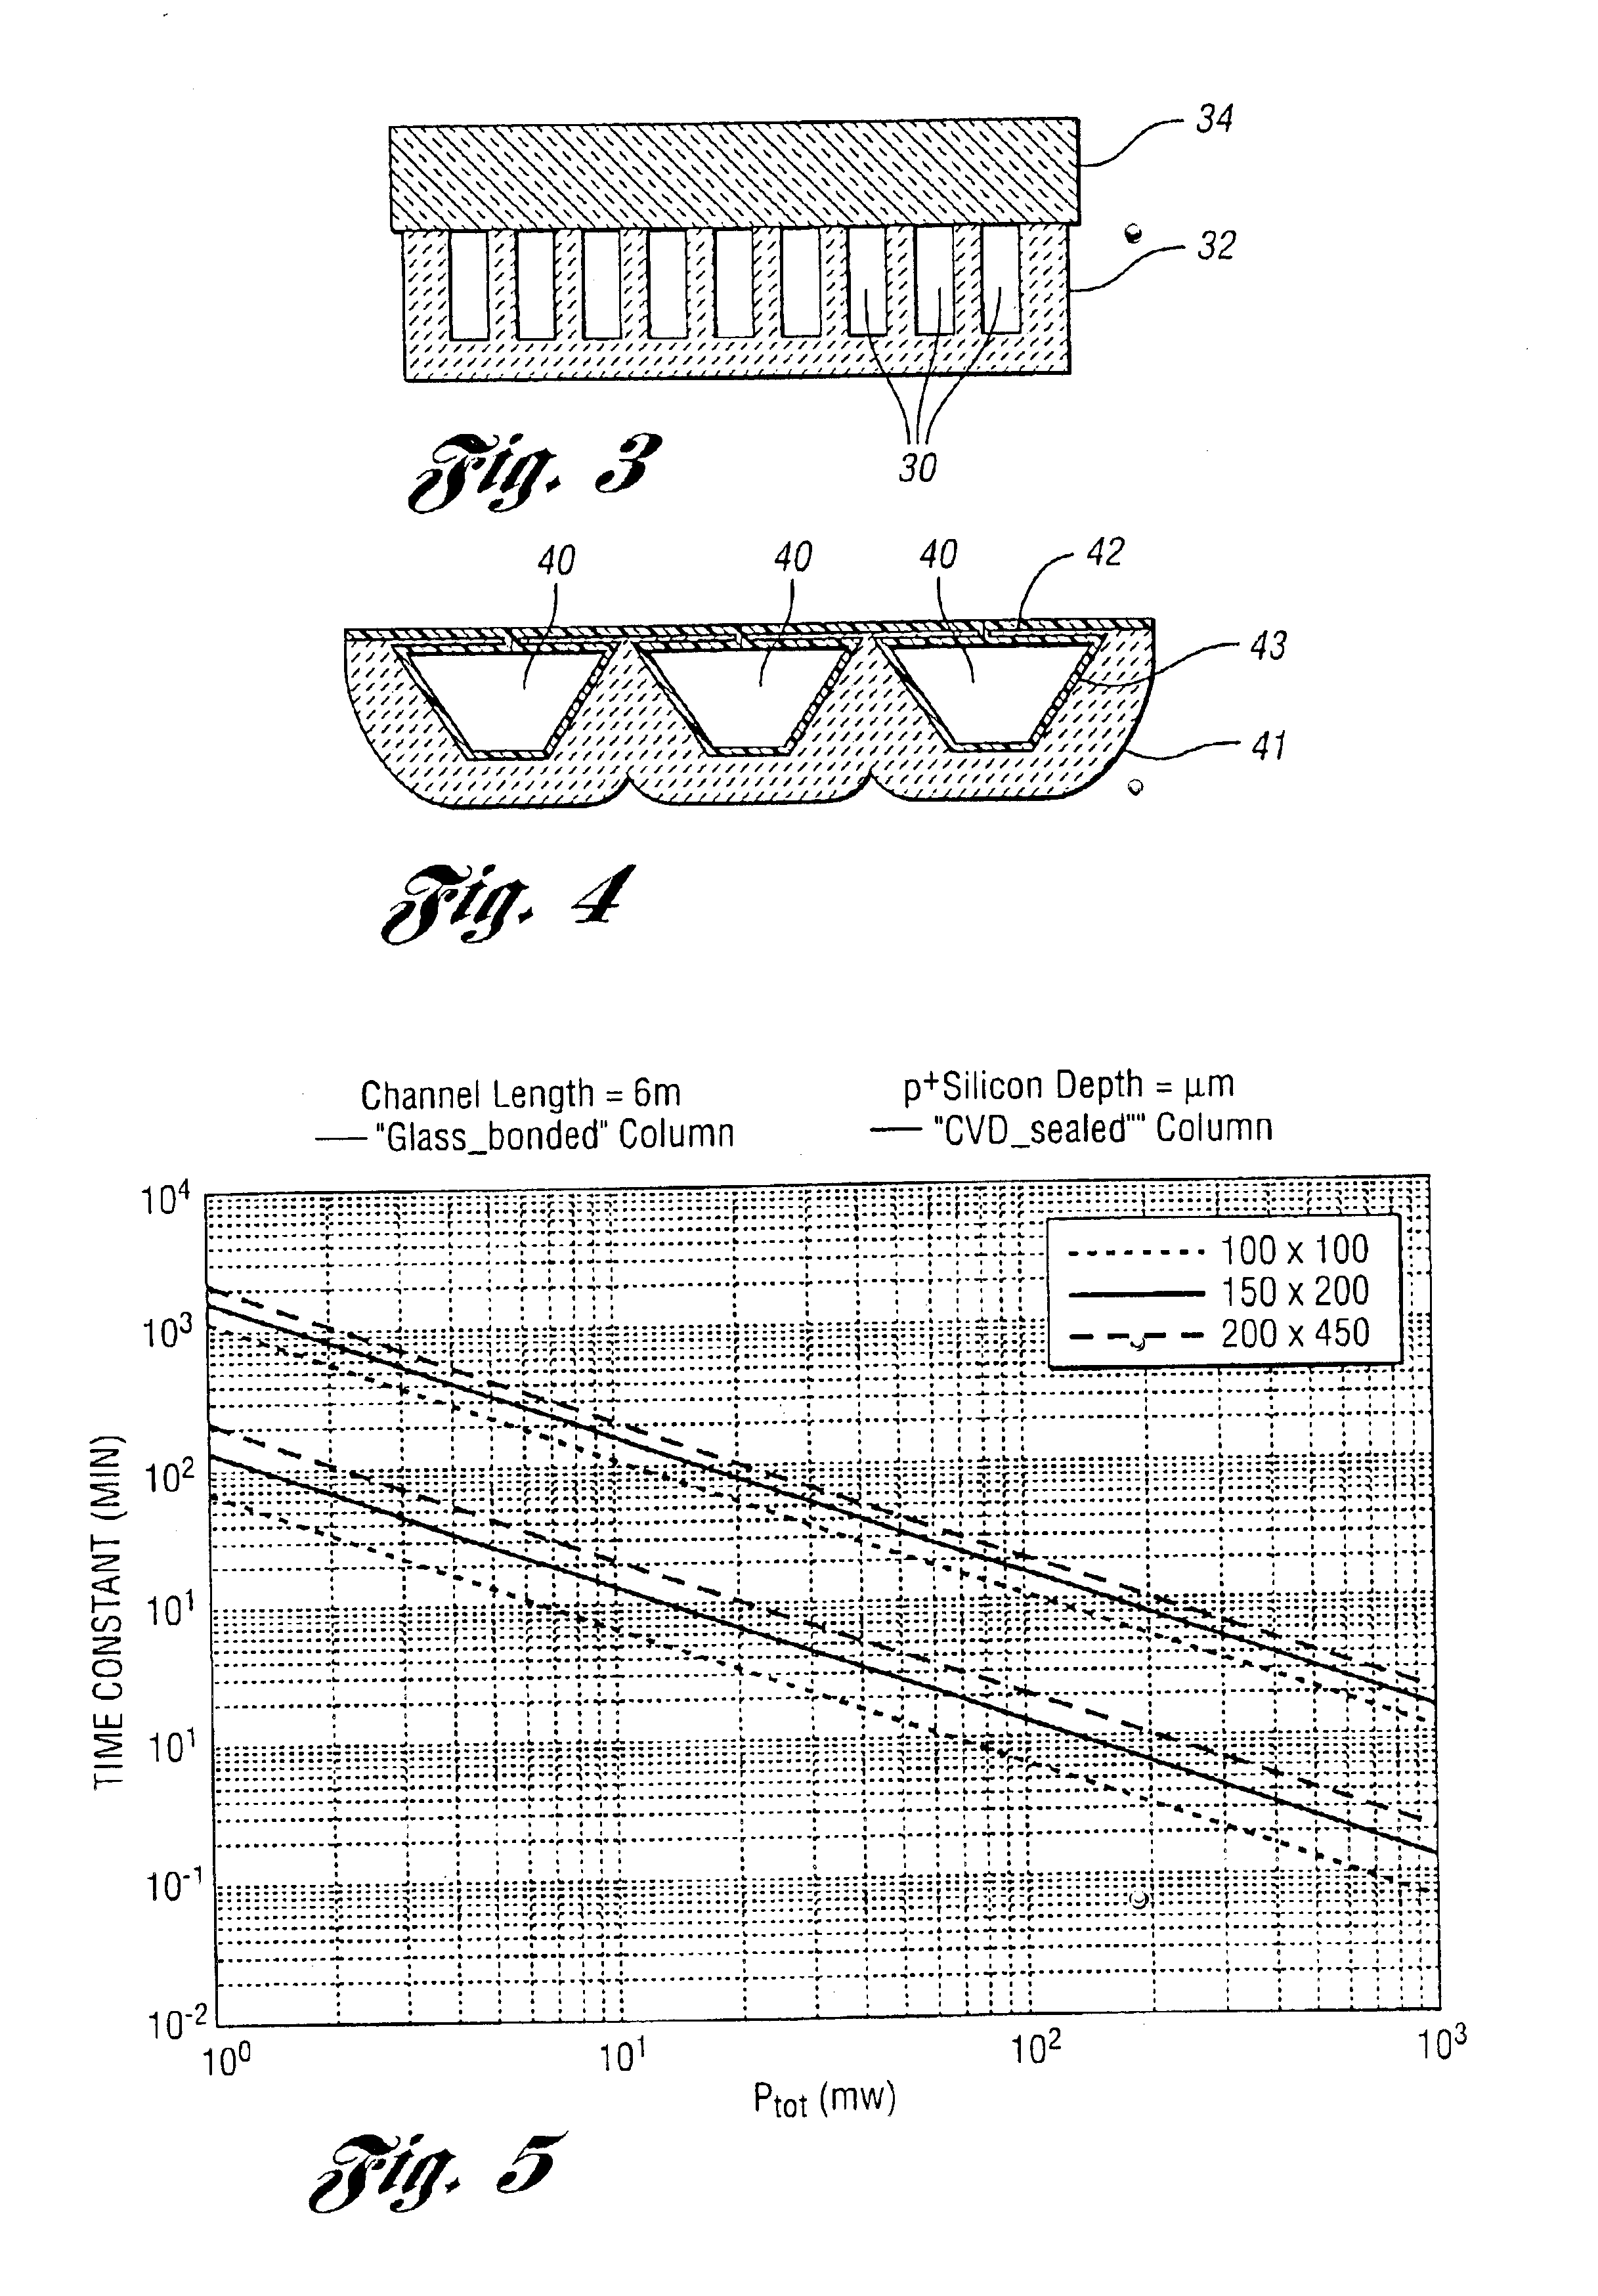 Separation microcolumn assembly for a microgas chromatograph and the like